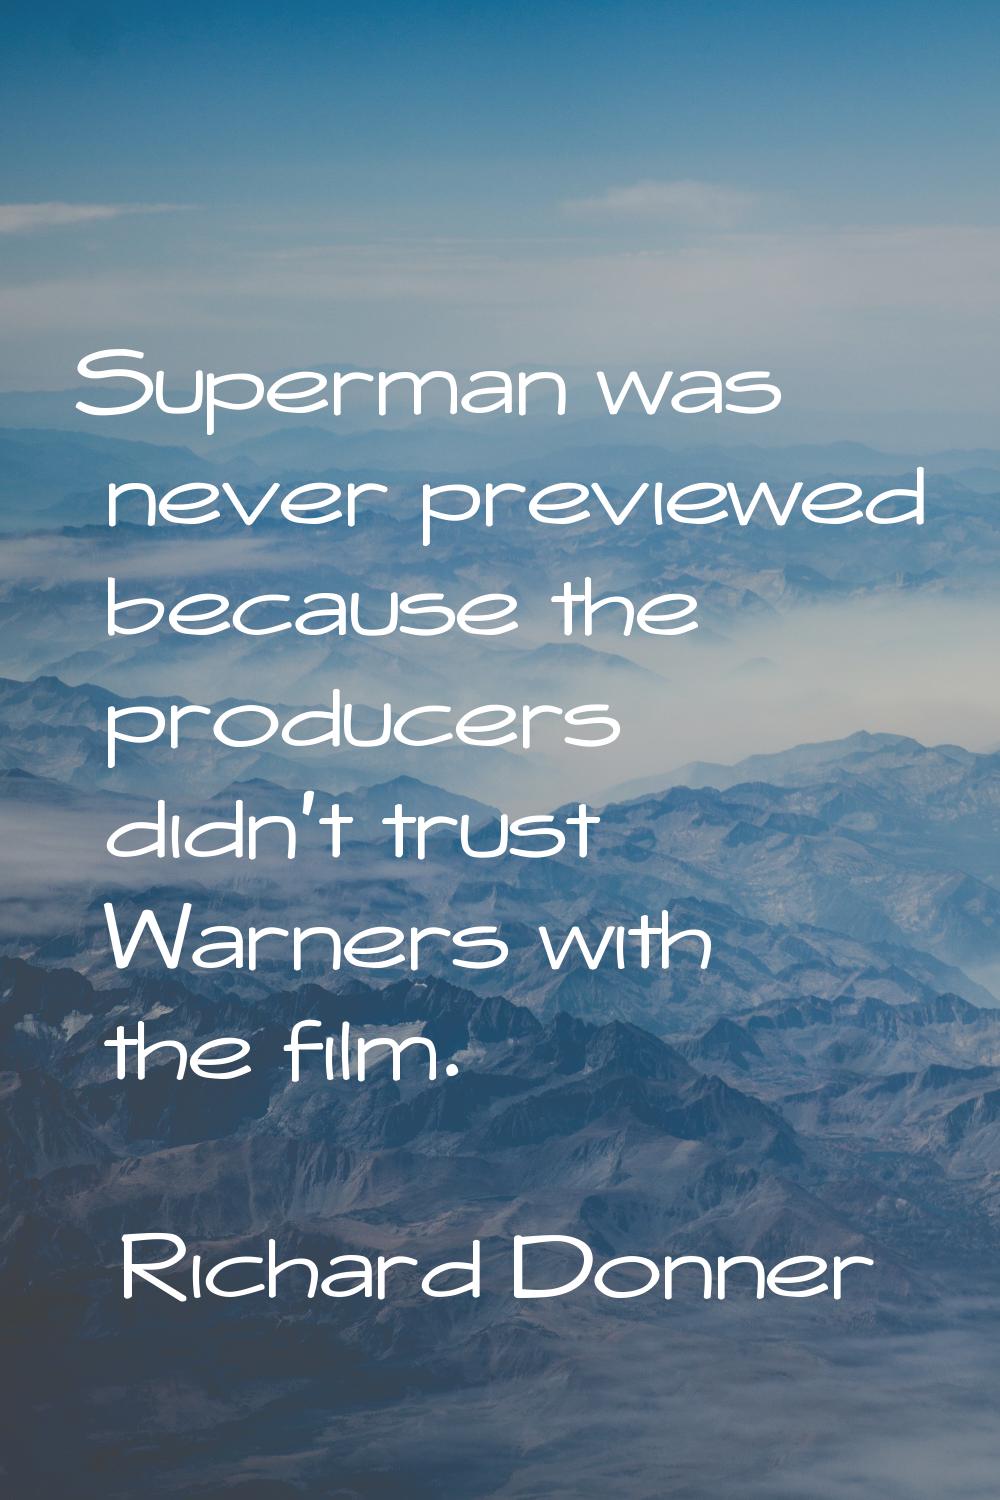 Superman was never previewed because the producers didn't trust Warners with the film.